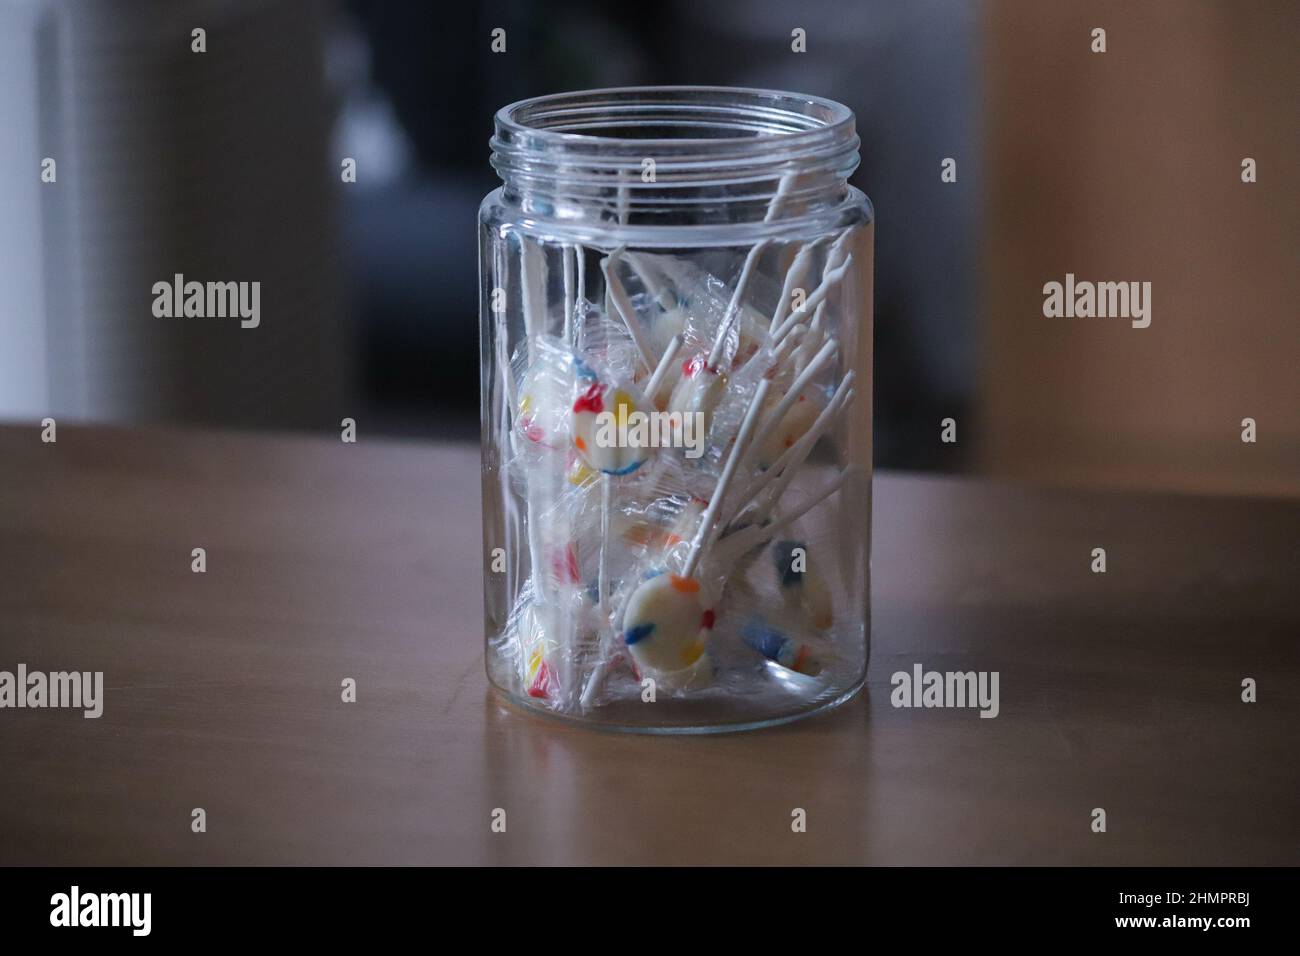 Colourful Lollipop Candy in Clear Glass Jar - Growth, Innocence, Youth and Child Protection Concepts Stock Photo